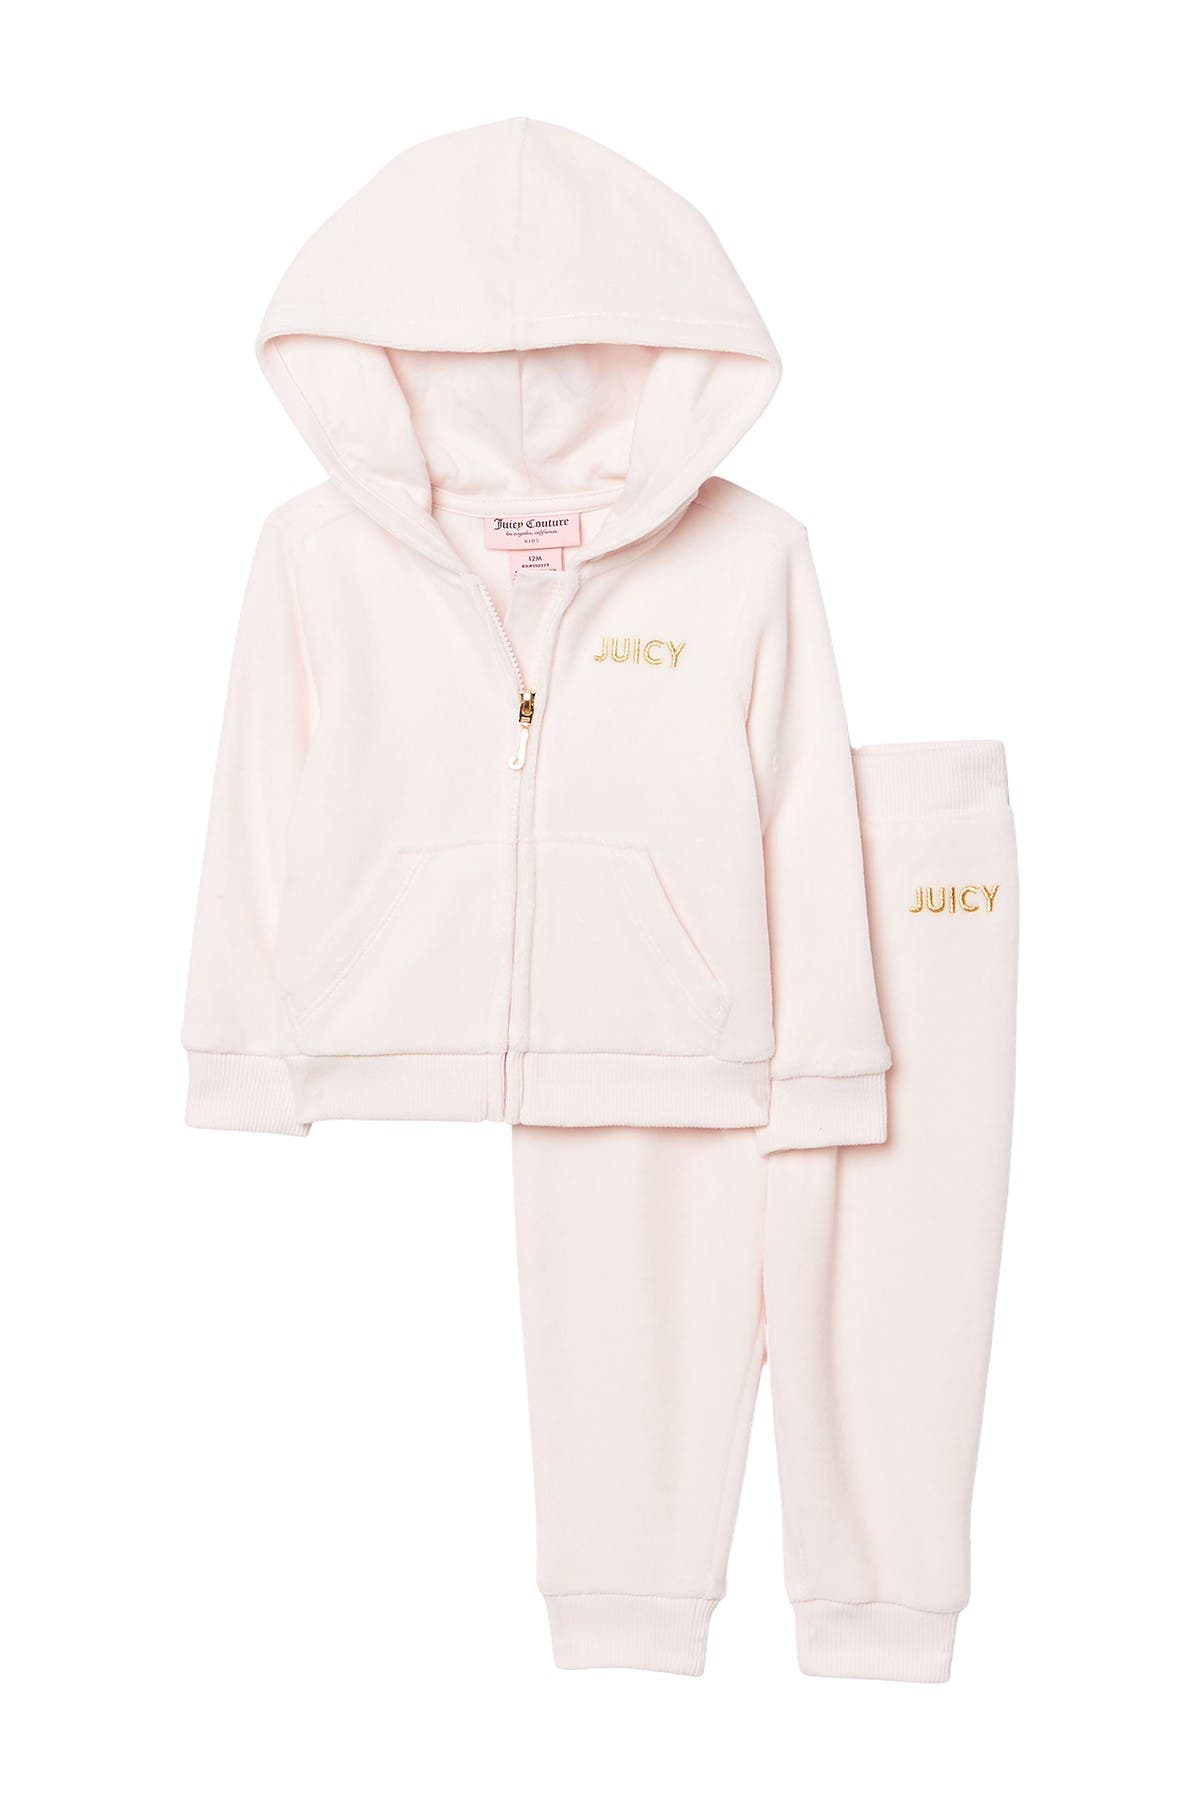 Juicy Couture | Baby Girls Tracksuit 